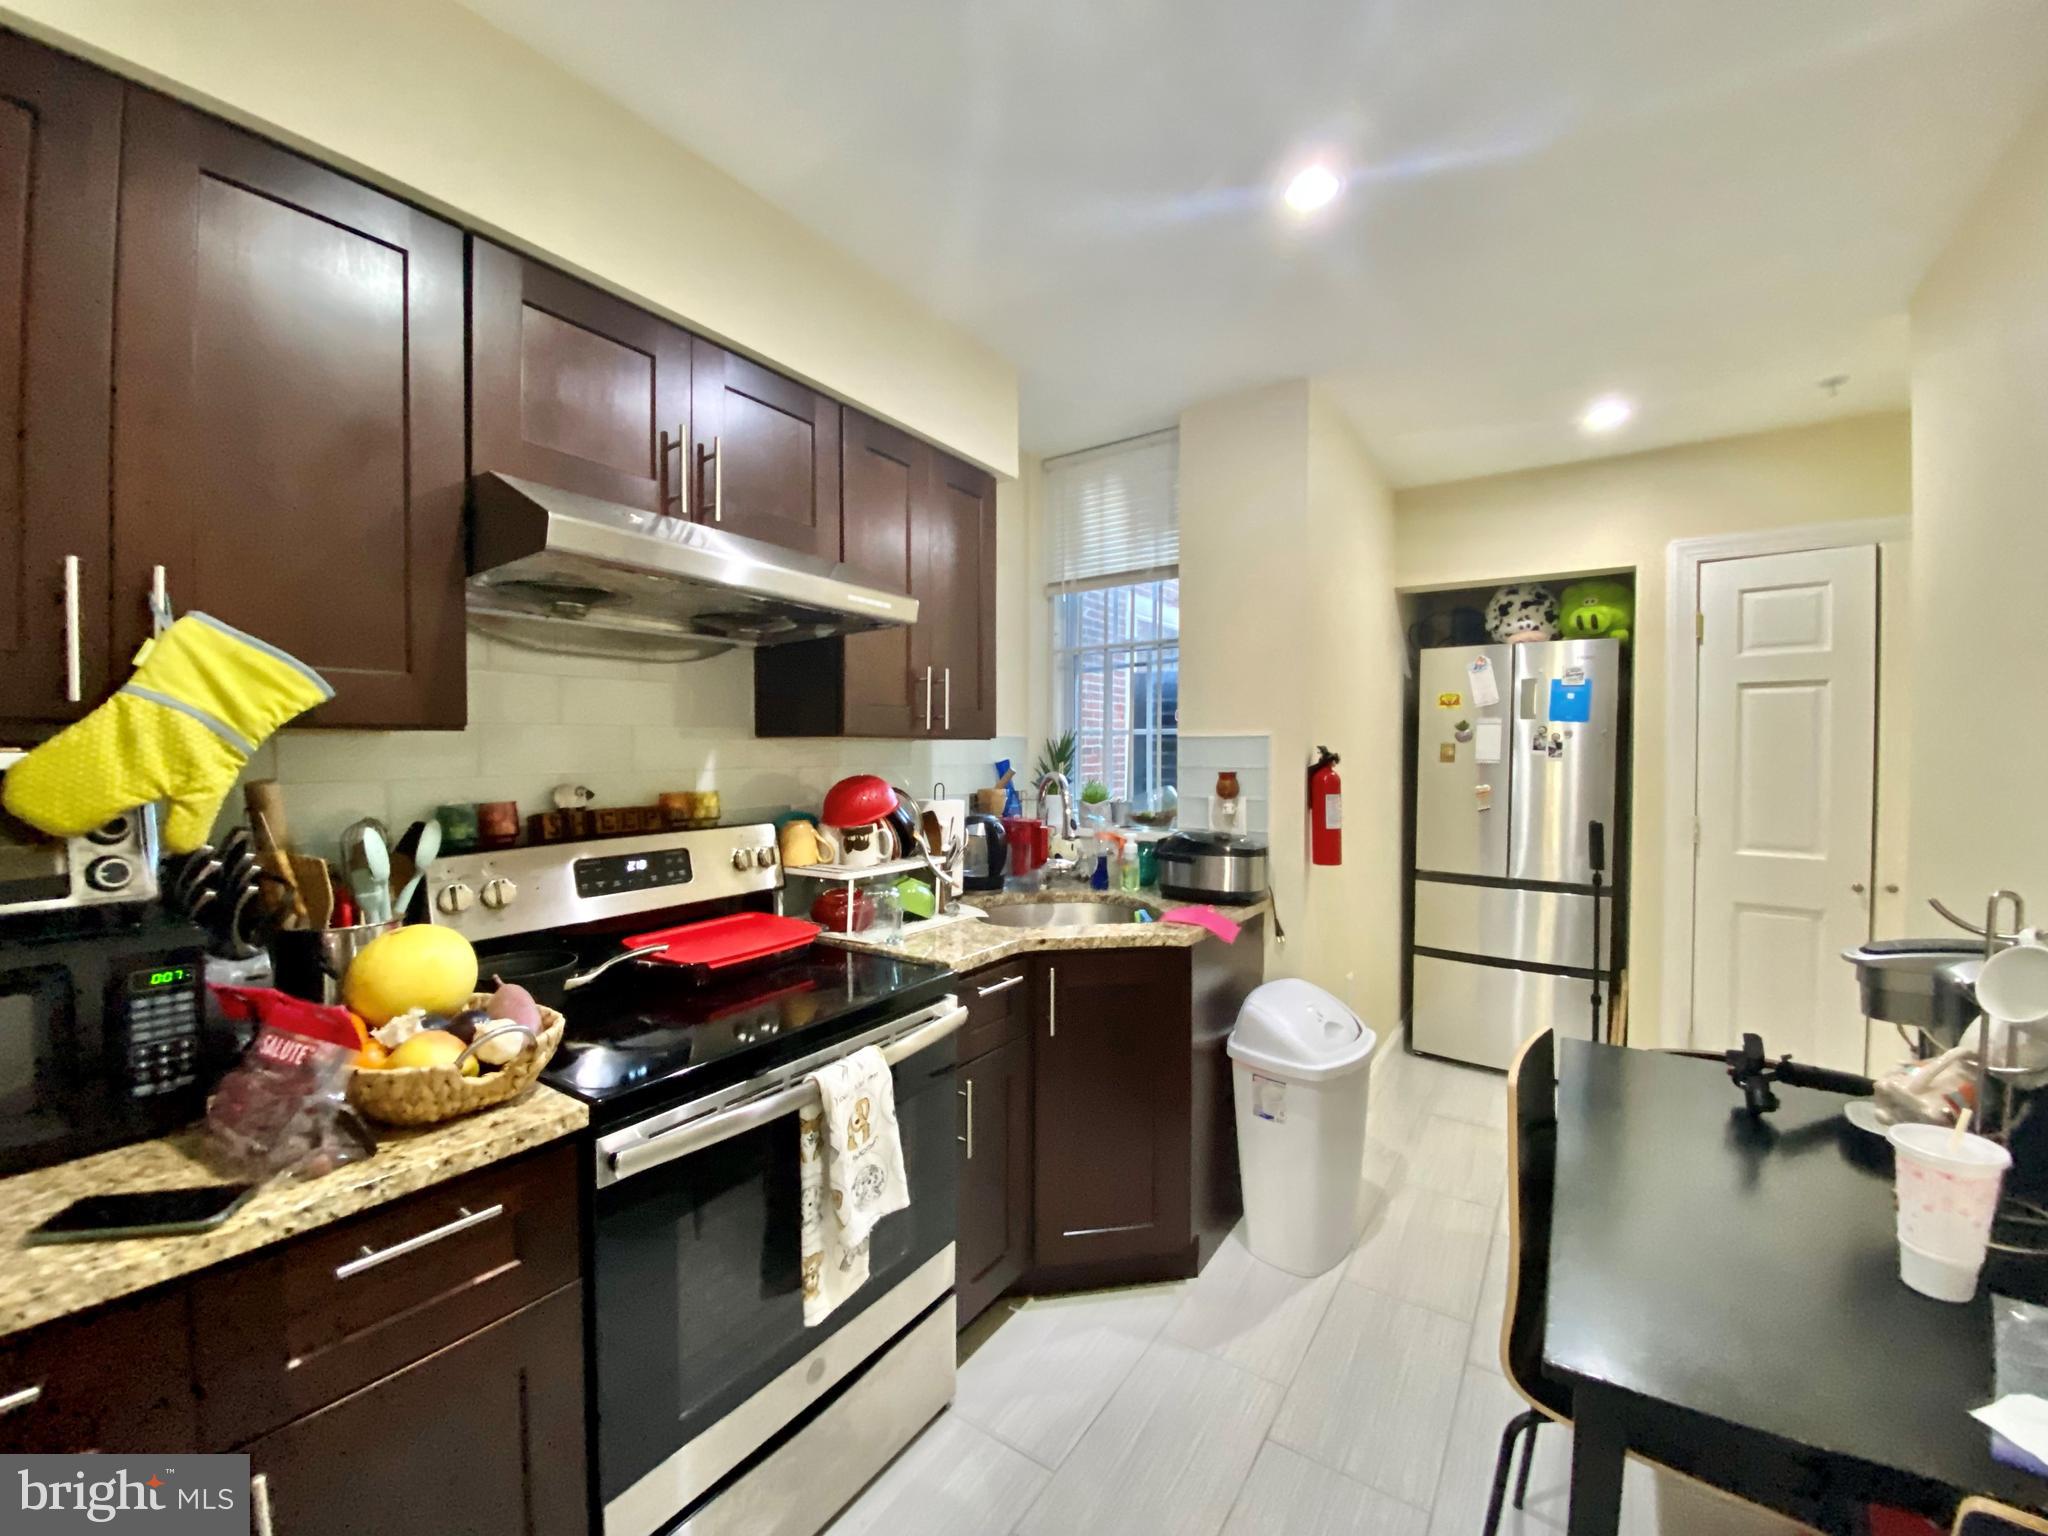 a kitchen with stainless steel appliances a sink a stove and refrigerator